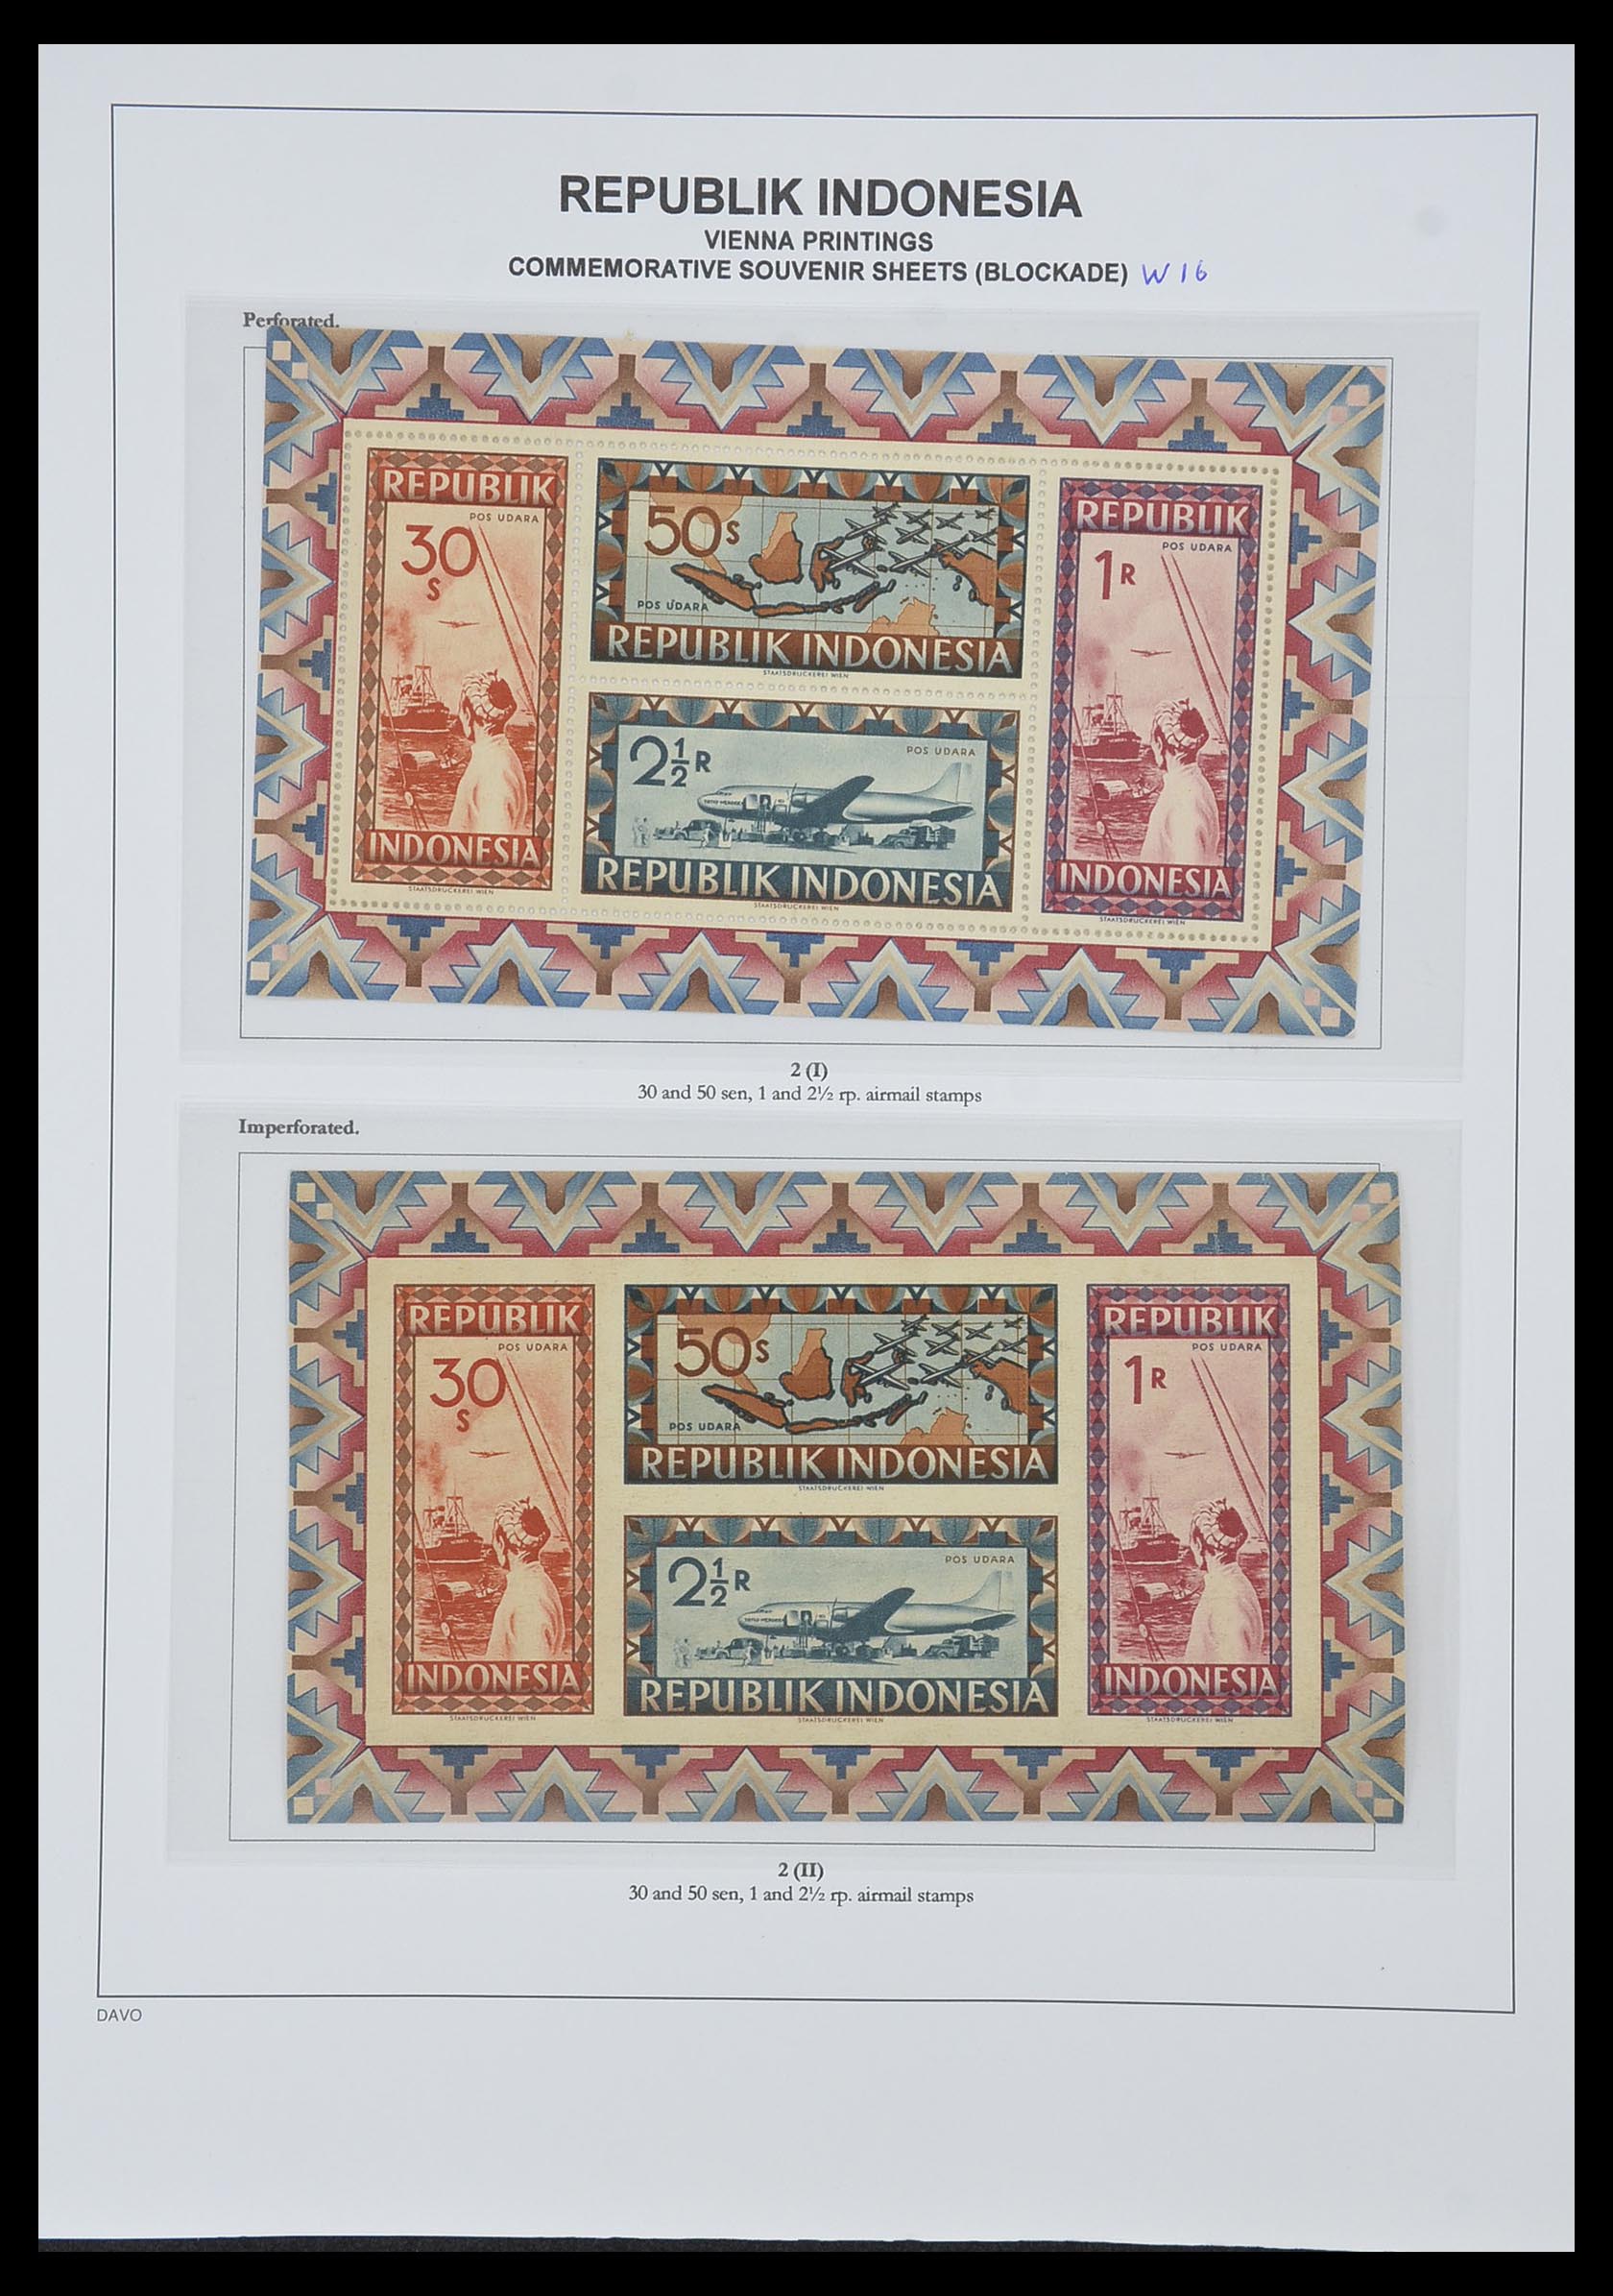 33988 031 - Stamp collection 33988 Vienna printings Indonesia.